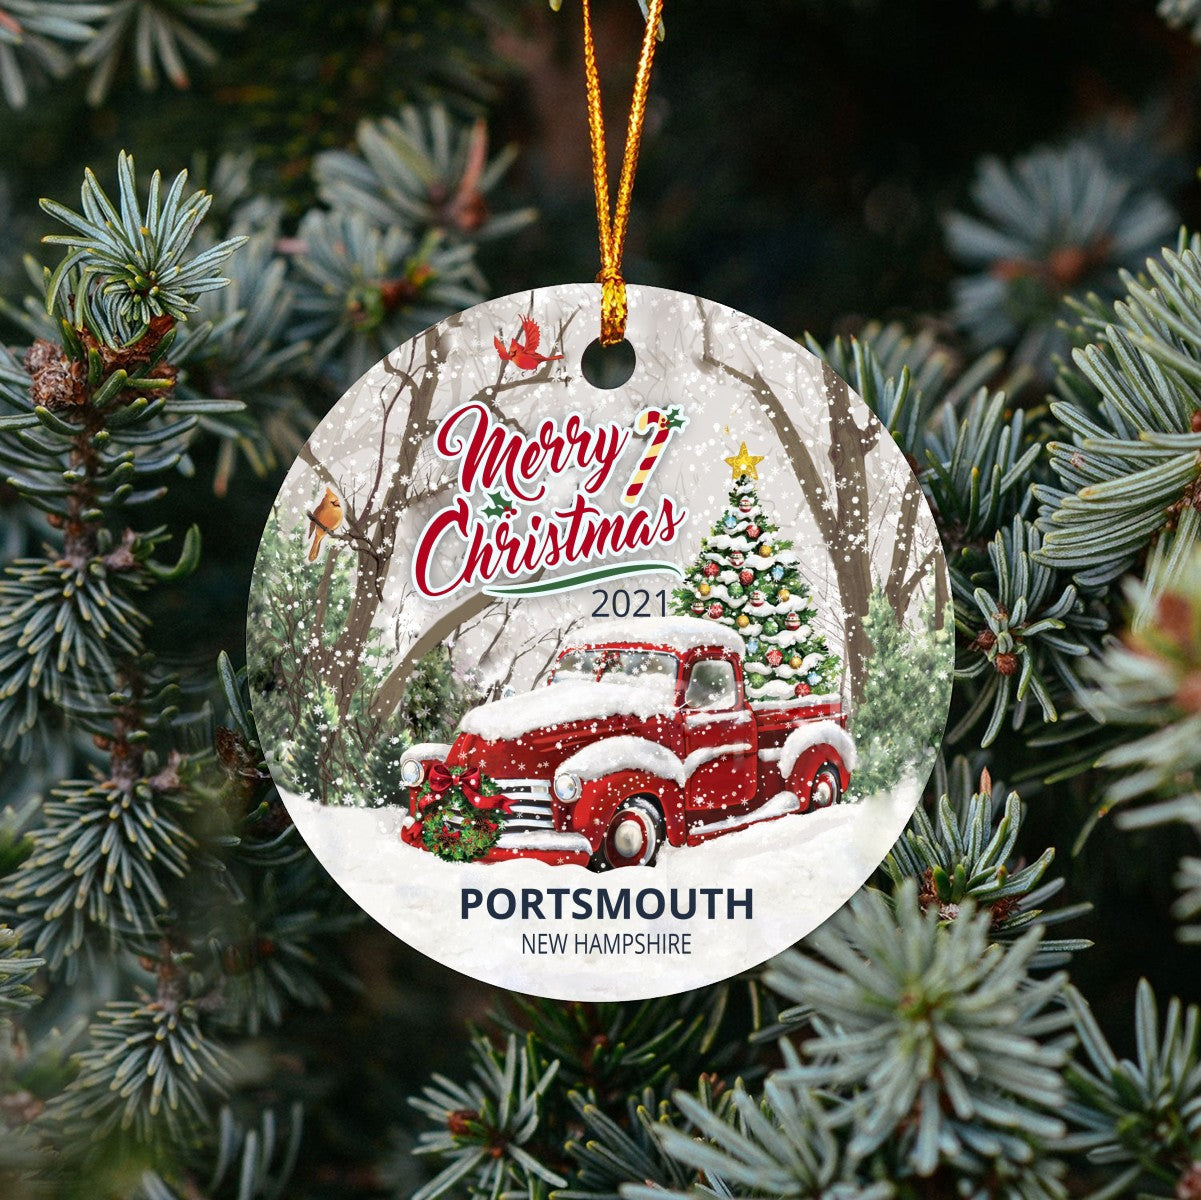 Christmas Tree Ornaments Portsmouth - Ornament Customize With Name City And State Portsmouth New Hampshire NH - Red Truck Xmas Ornaments 3'' Plastic Gift For Family, Friend And Housewarming